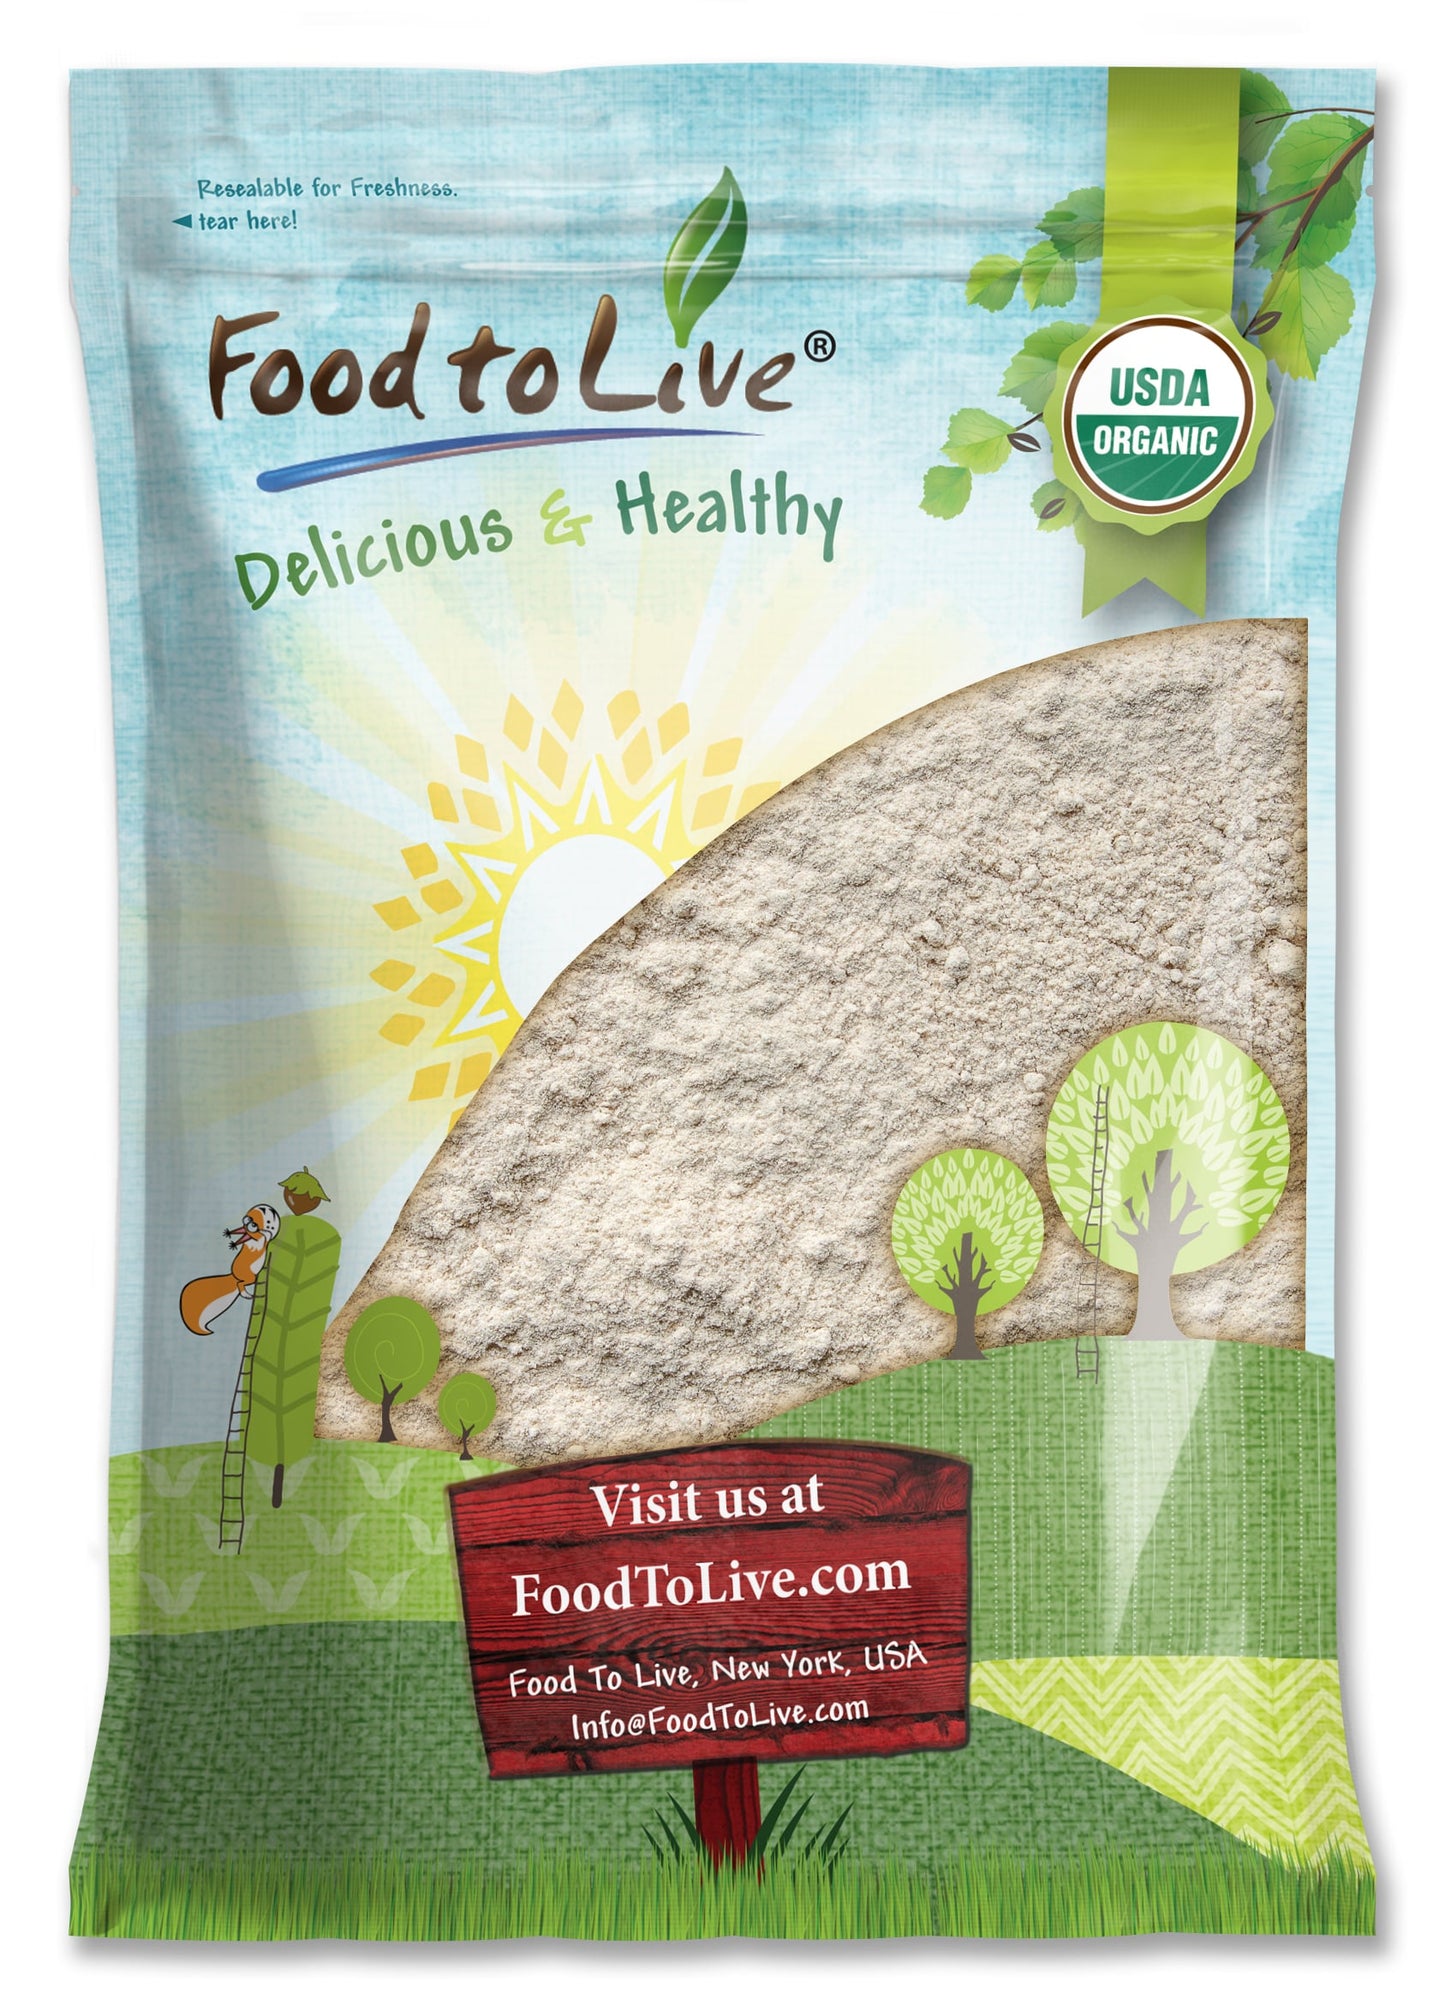 Gluten Free Organic Amaranth Flour – Non-GMO Whole Grain Flour, Vegan Fine Meal, Bulk Powder. High in Fiber, Protein. Great for Cooking, Baking, and as Thickener. Made in USA